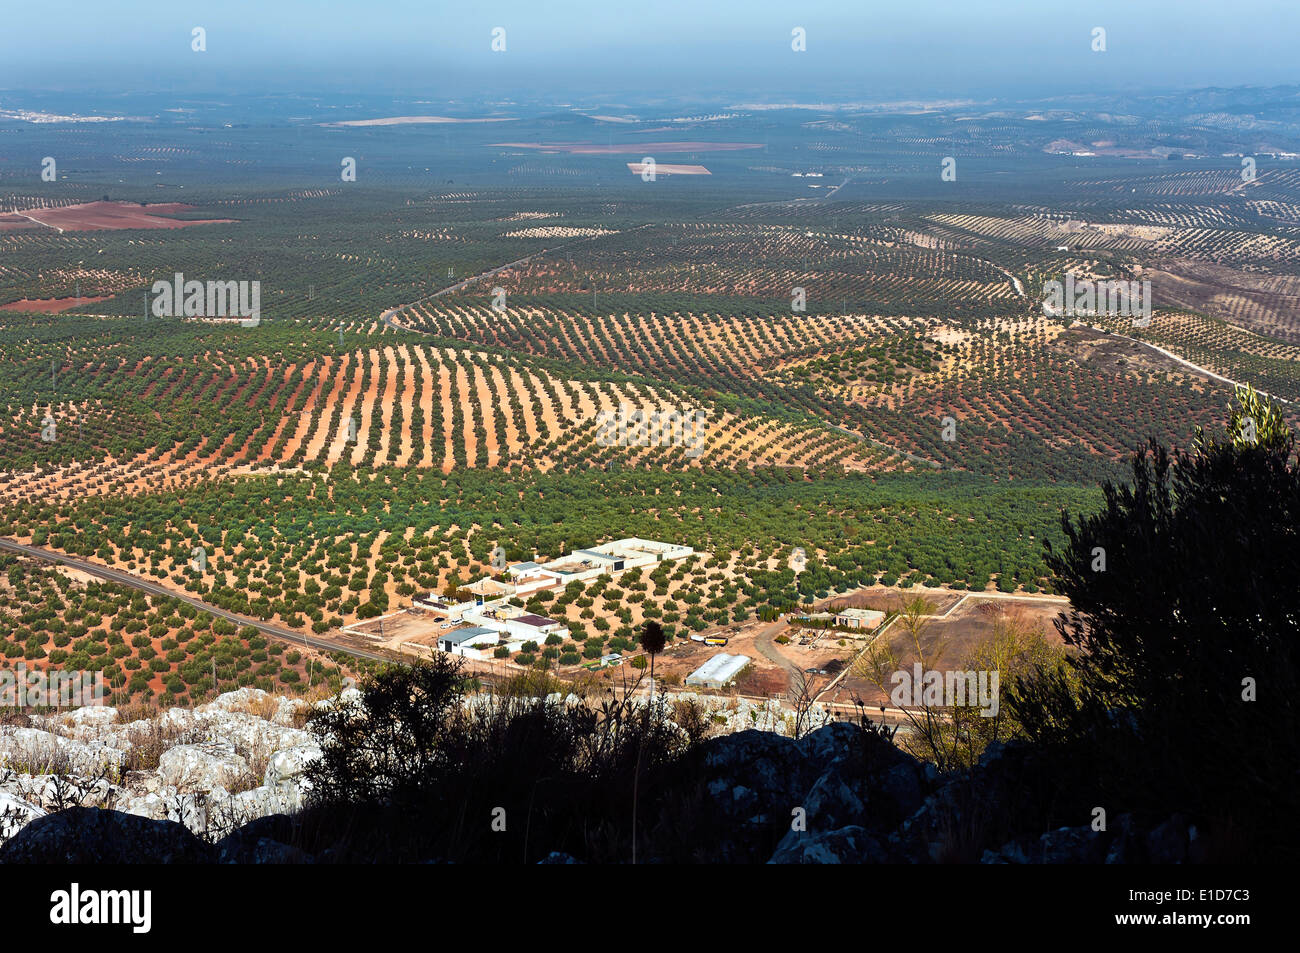 Landscape of olives groves, The Tourist Route of the Bandits, Alameda, Malaga province, Region of Andalusia, Spain, Europe Stock Photo